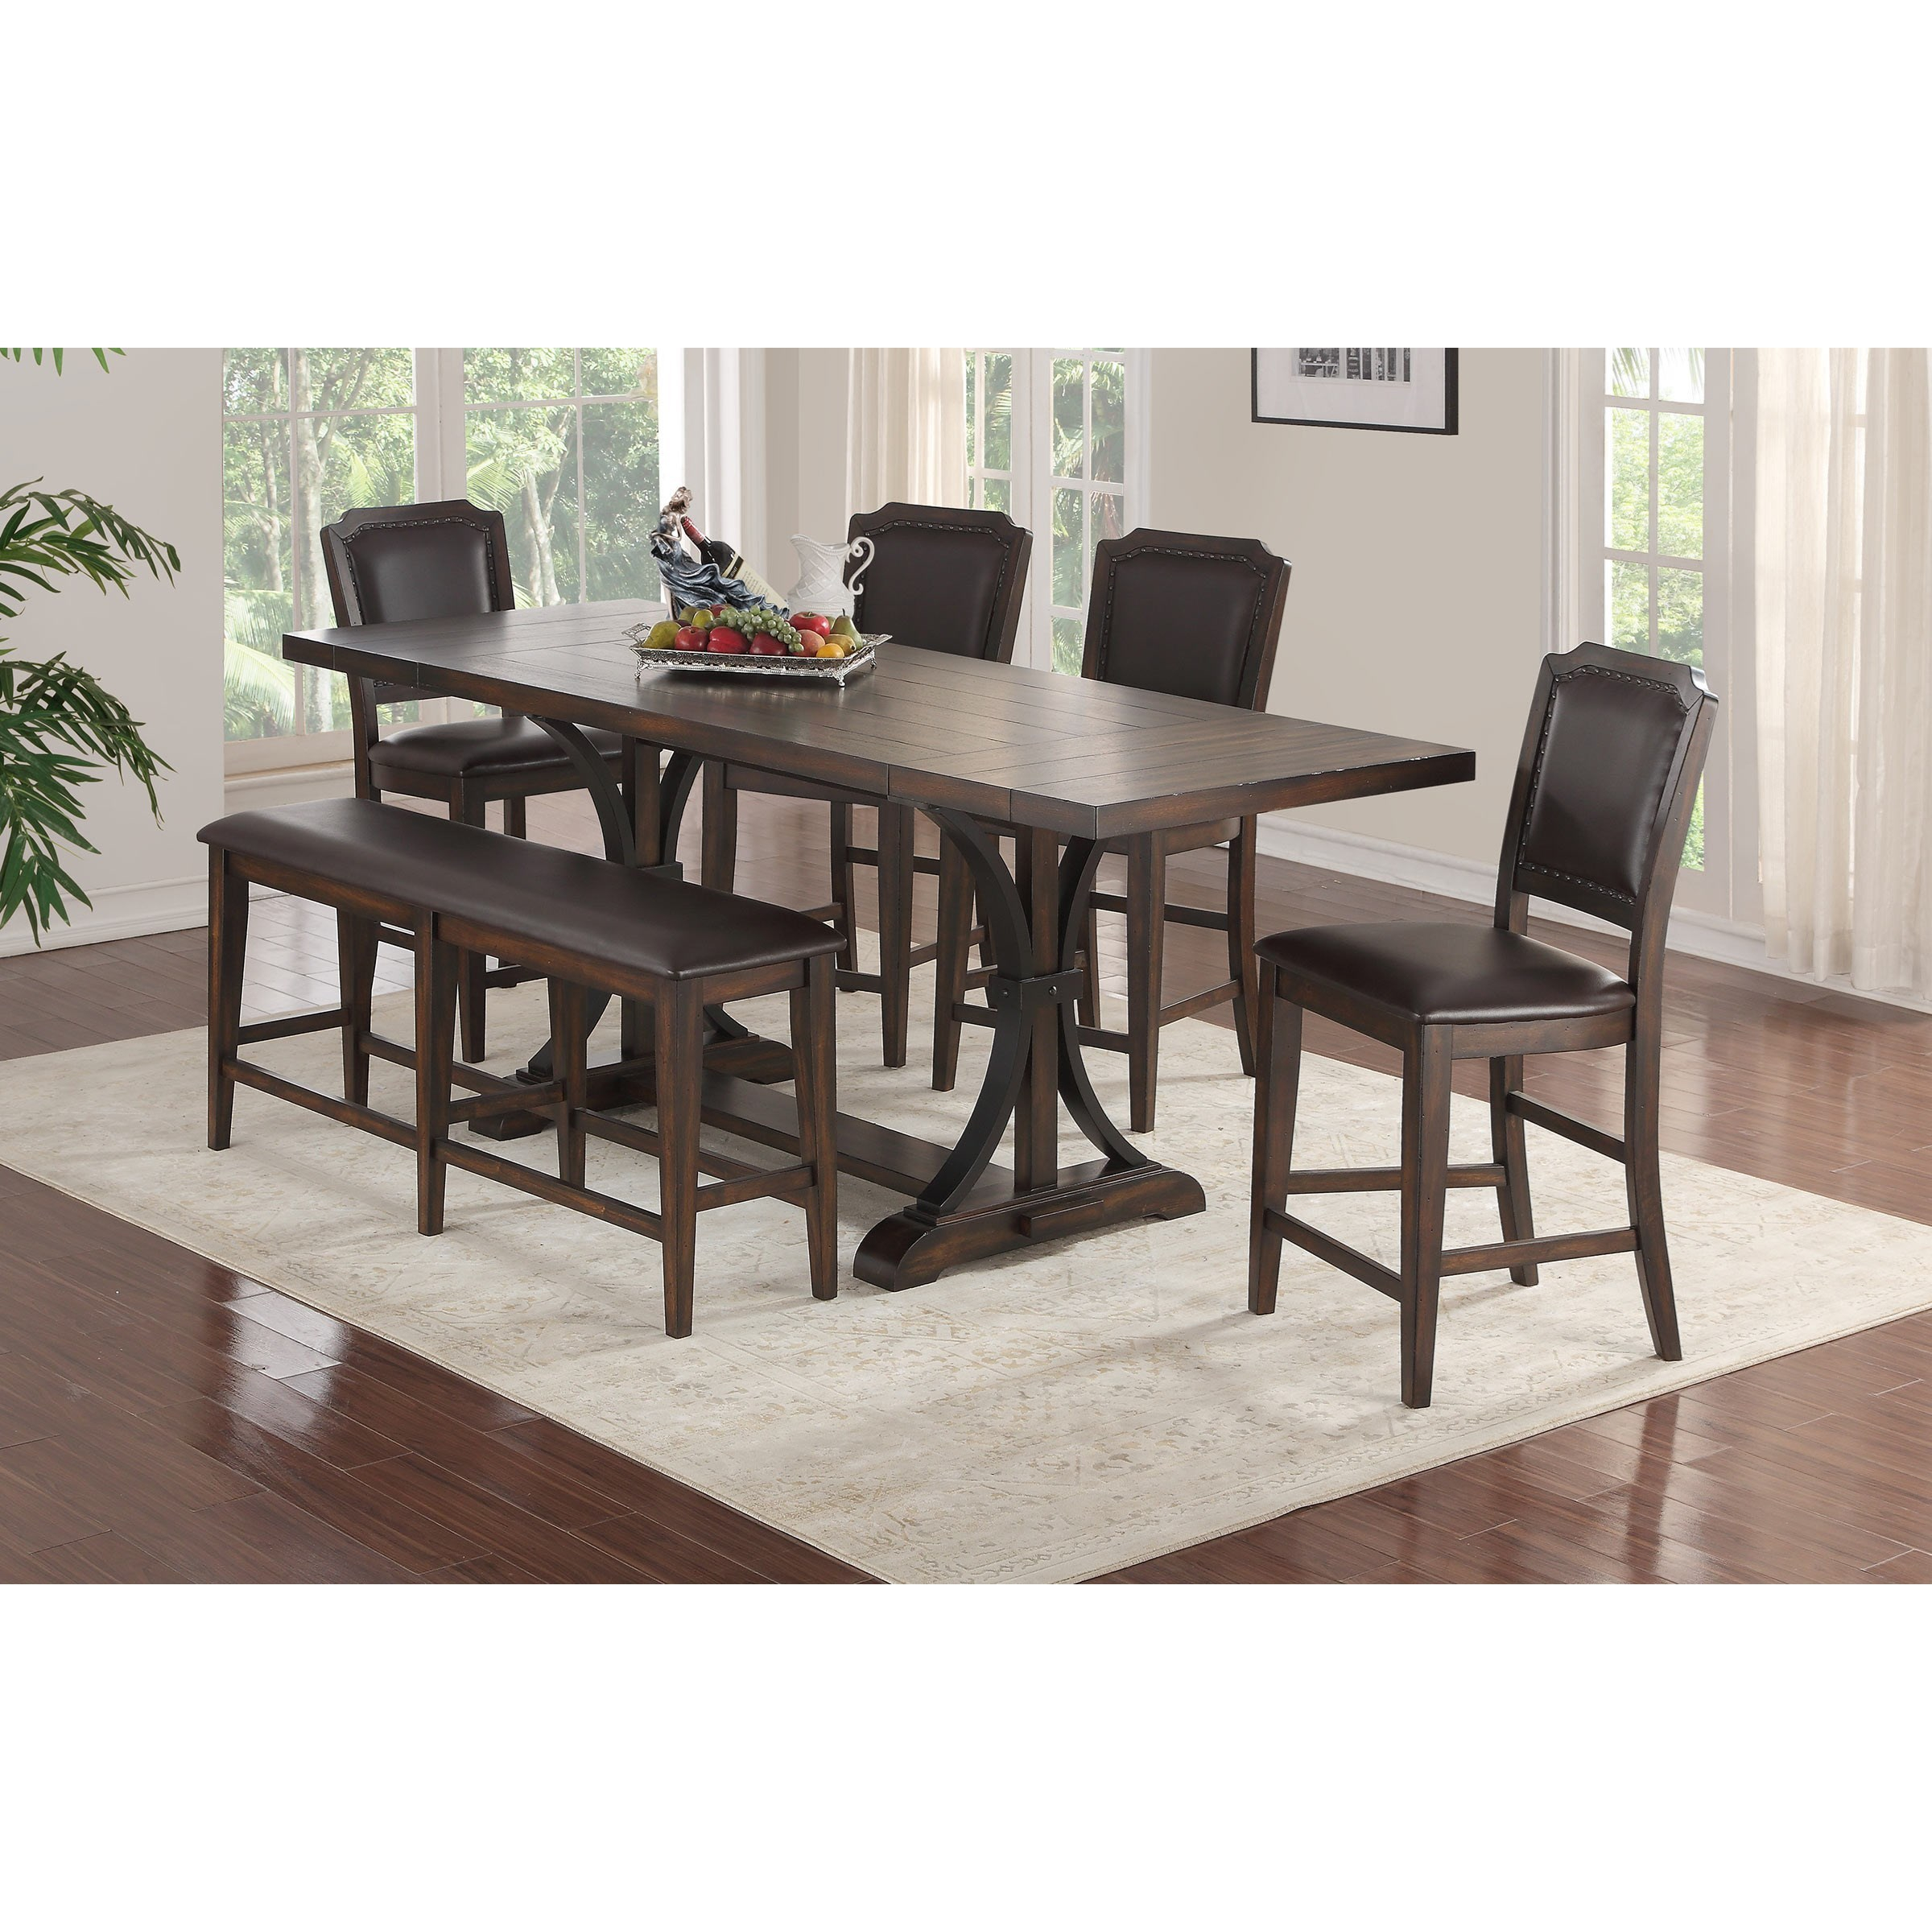 Montreal Gathering Table And Chair Set With Bench inside dimensions 2400 X 2400